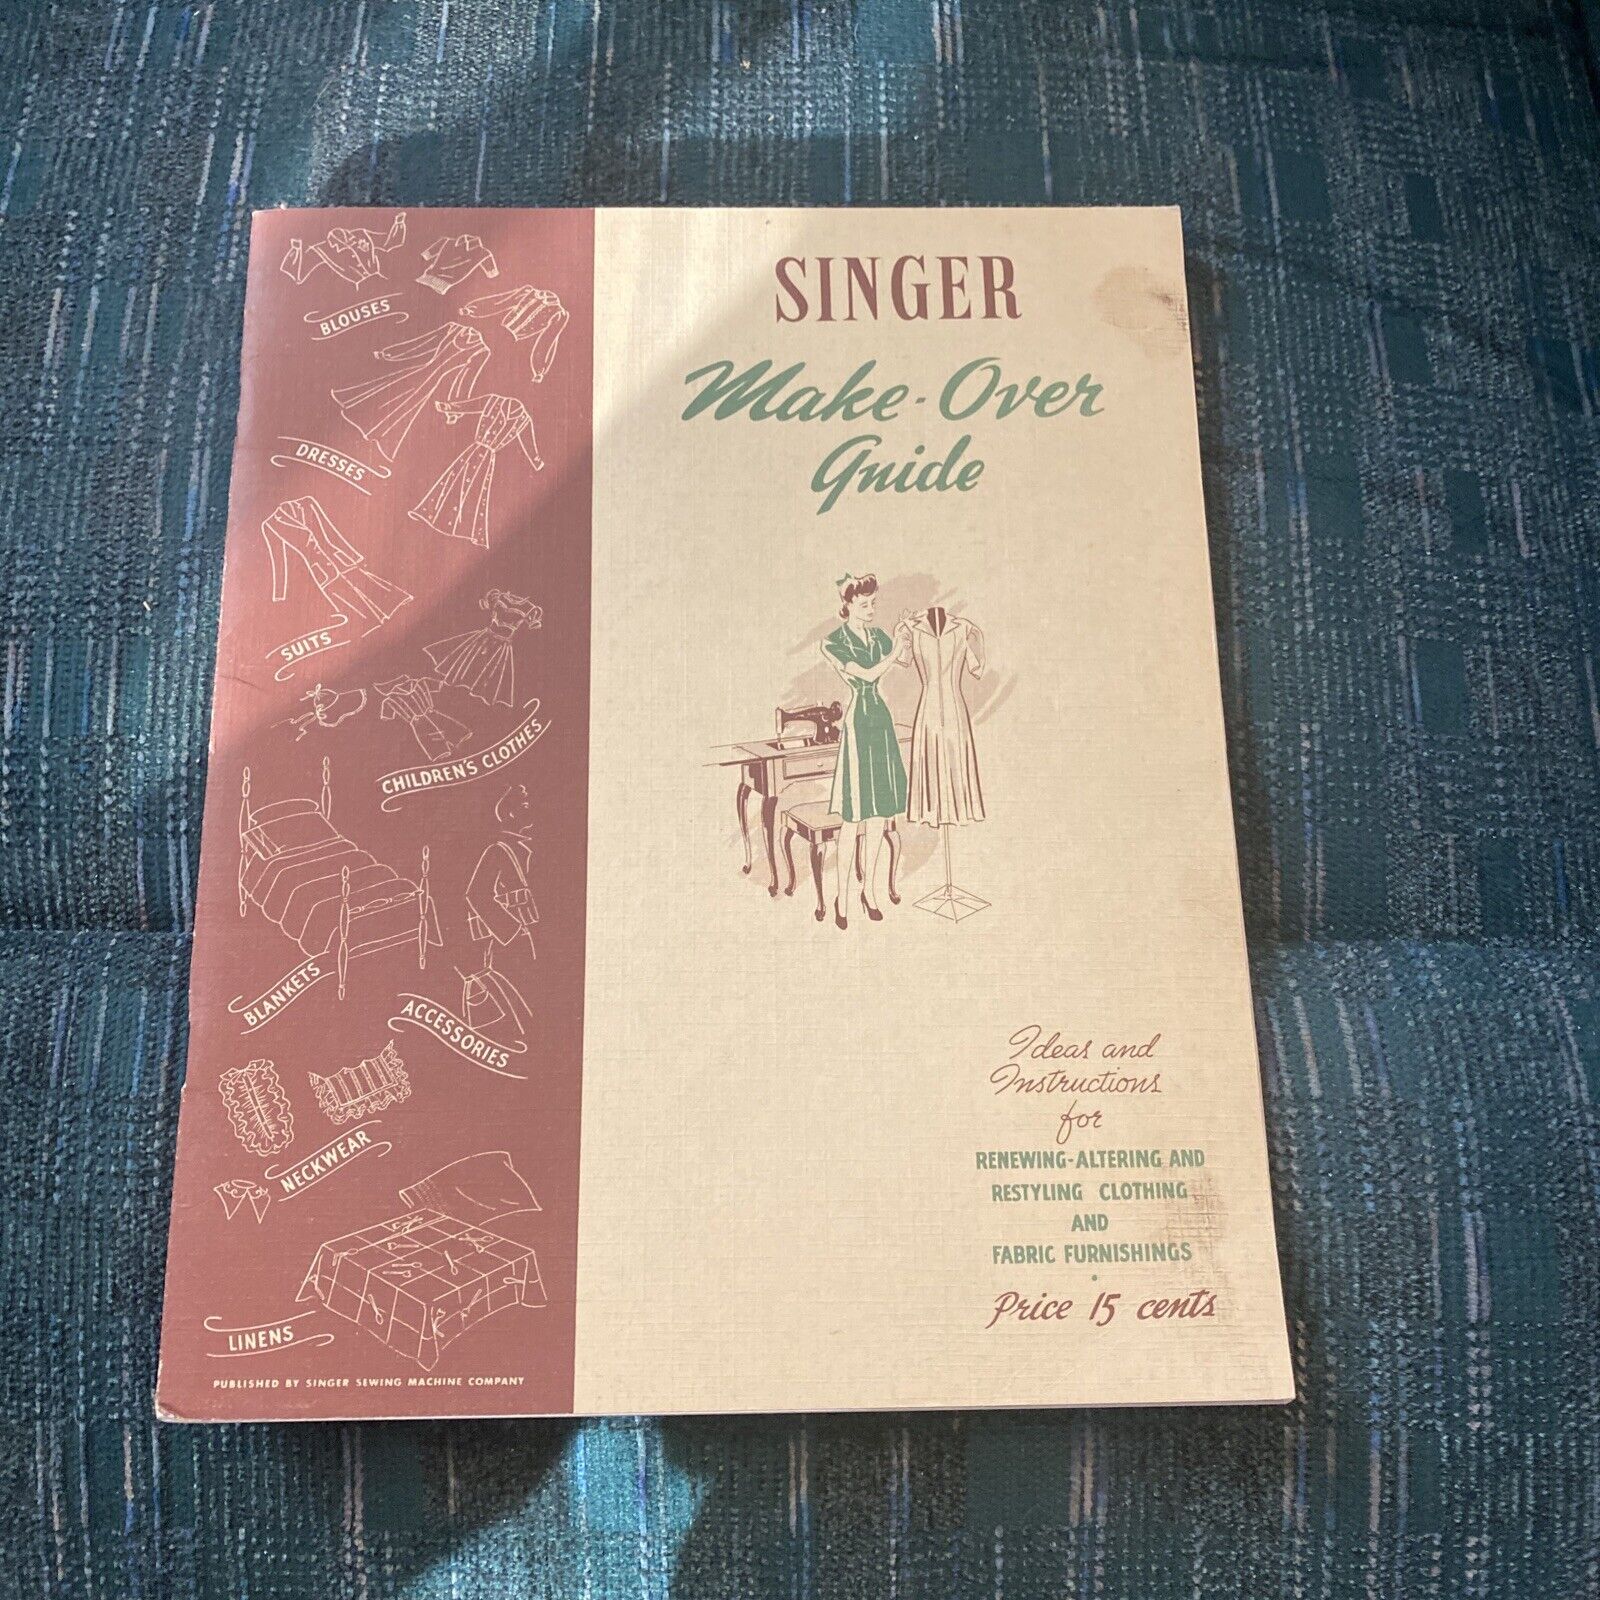 Vintage 1942 Singer Sewing Machine Co. Make-Over Guide Altering Renewing